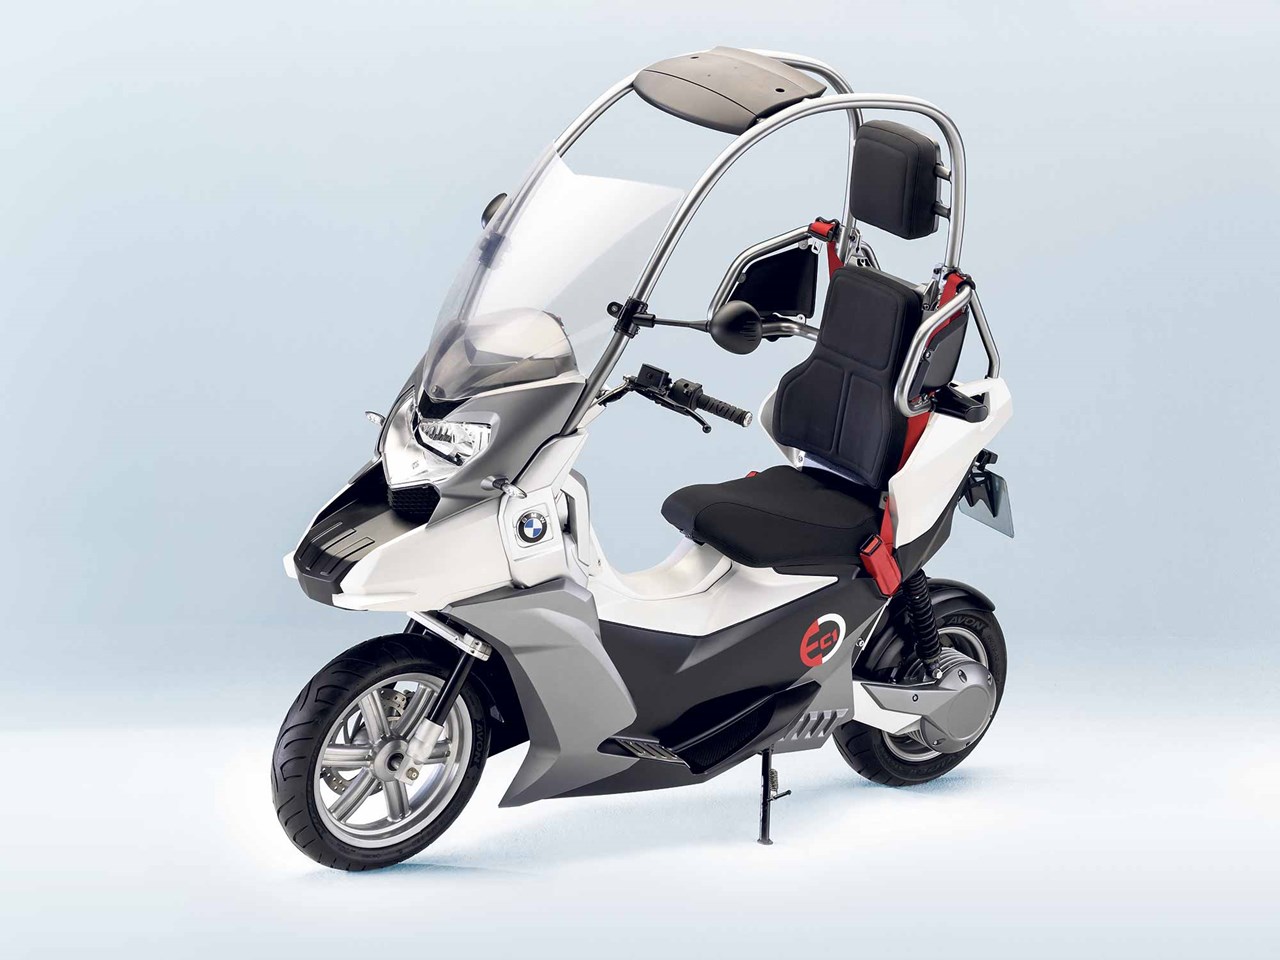 Reborn electric BMW C1 gets airbags, safety cell, aero and can be ridden as a normal bike | MCN